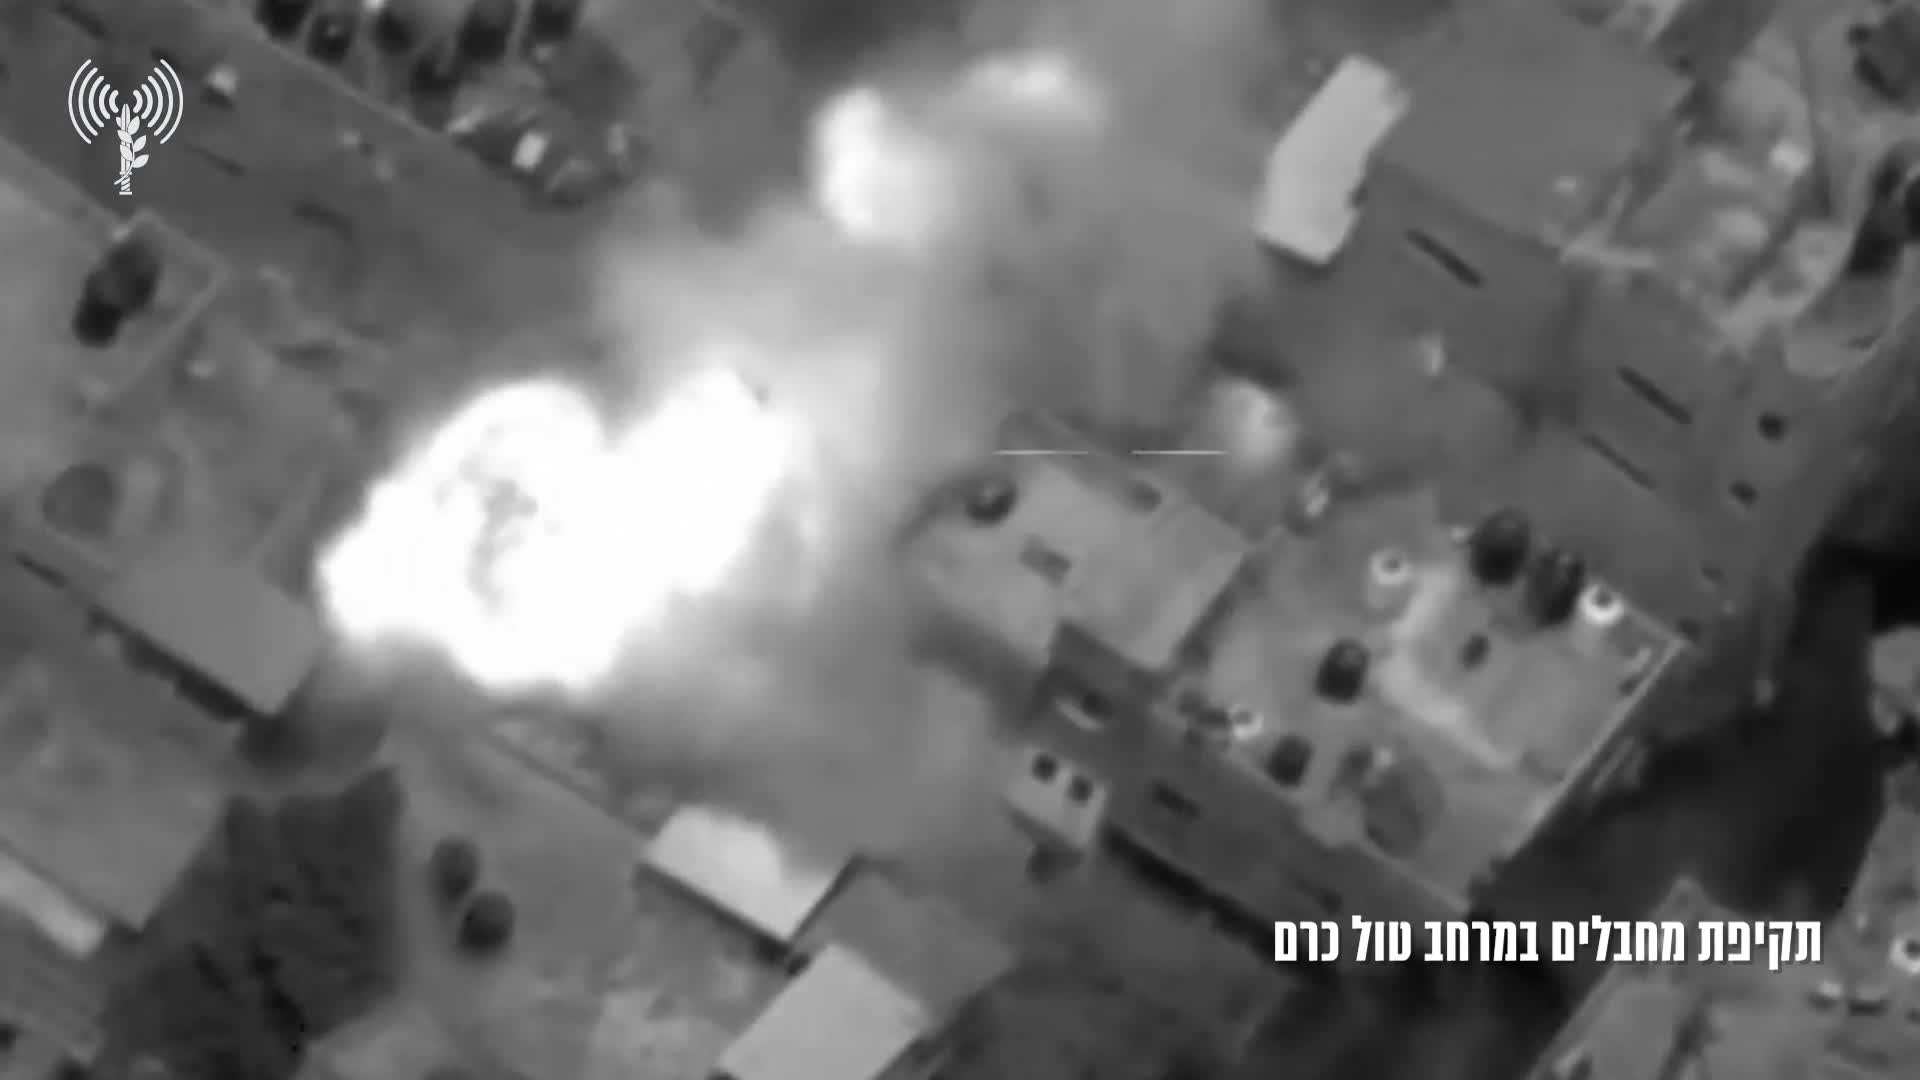 The Israeli army confirms carrying out an airstrike in the Nur Shams camp in the Tulkarem area of the West Bank earlier today, killing a Palestinian Islamic Jihad commander. According to the Israeli army and Shin Bet, Saeed Jaber was responsible for several shooting and explosive device attacks against troops and civilians